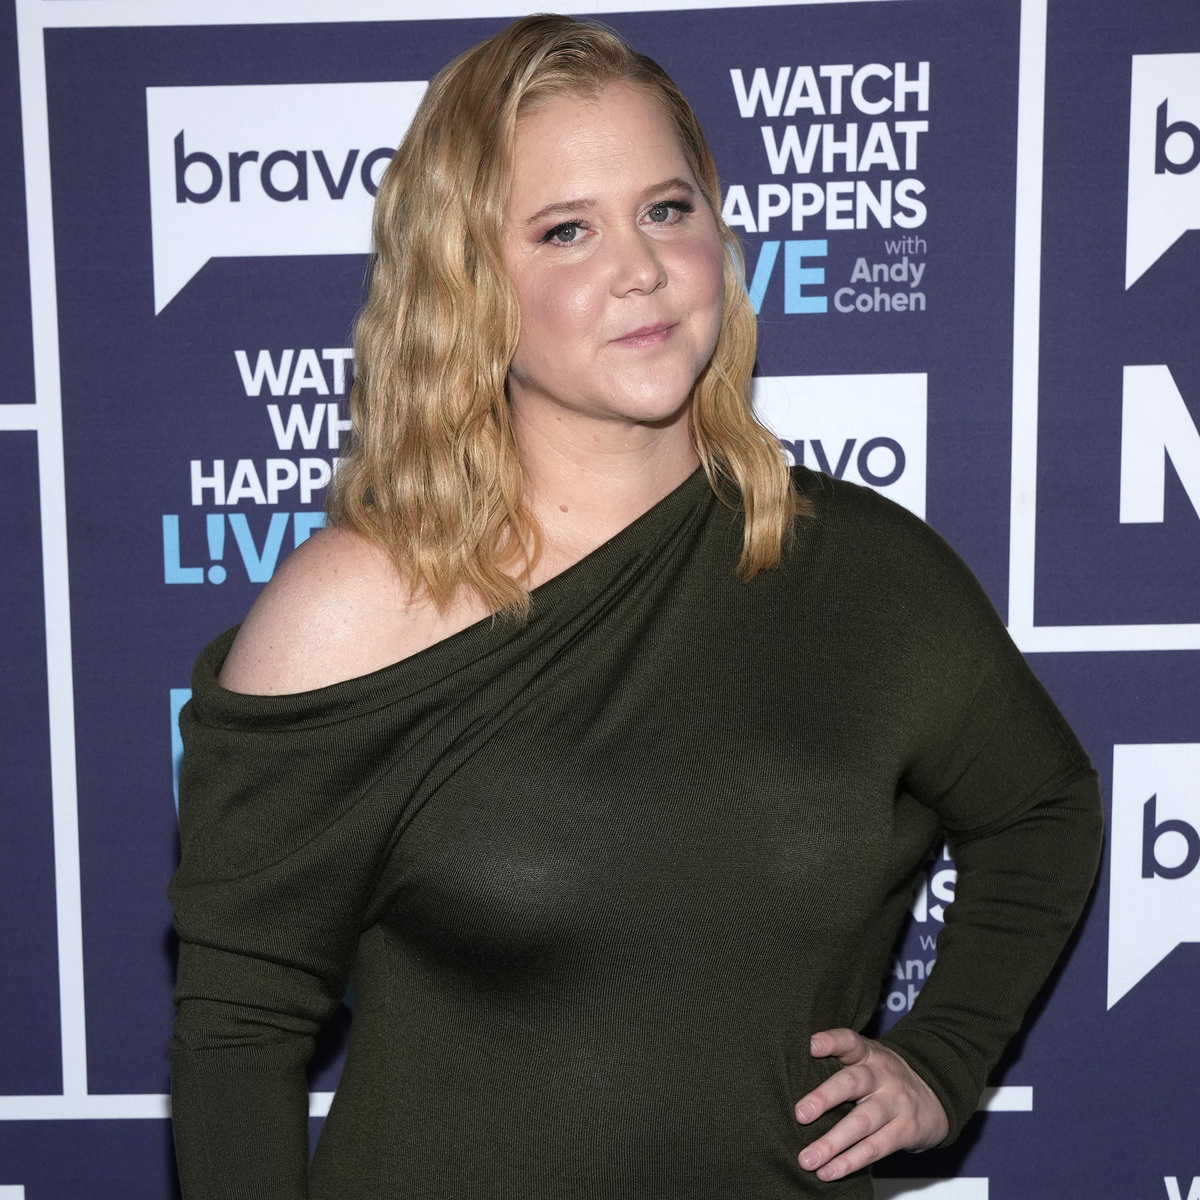 Amy Schumer News, Pictures, and Videos - E! Online